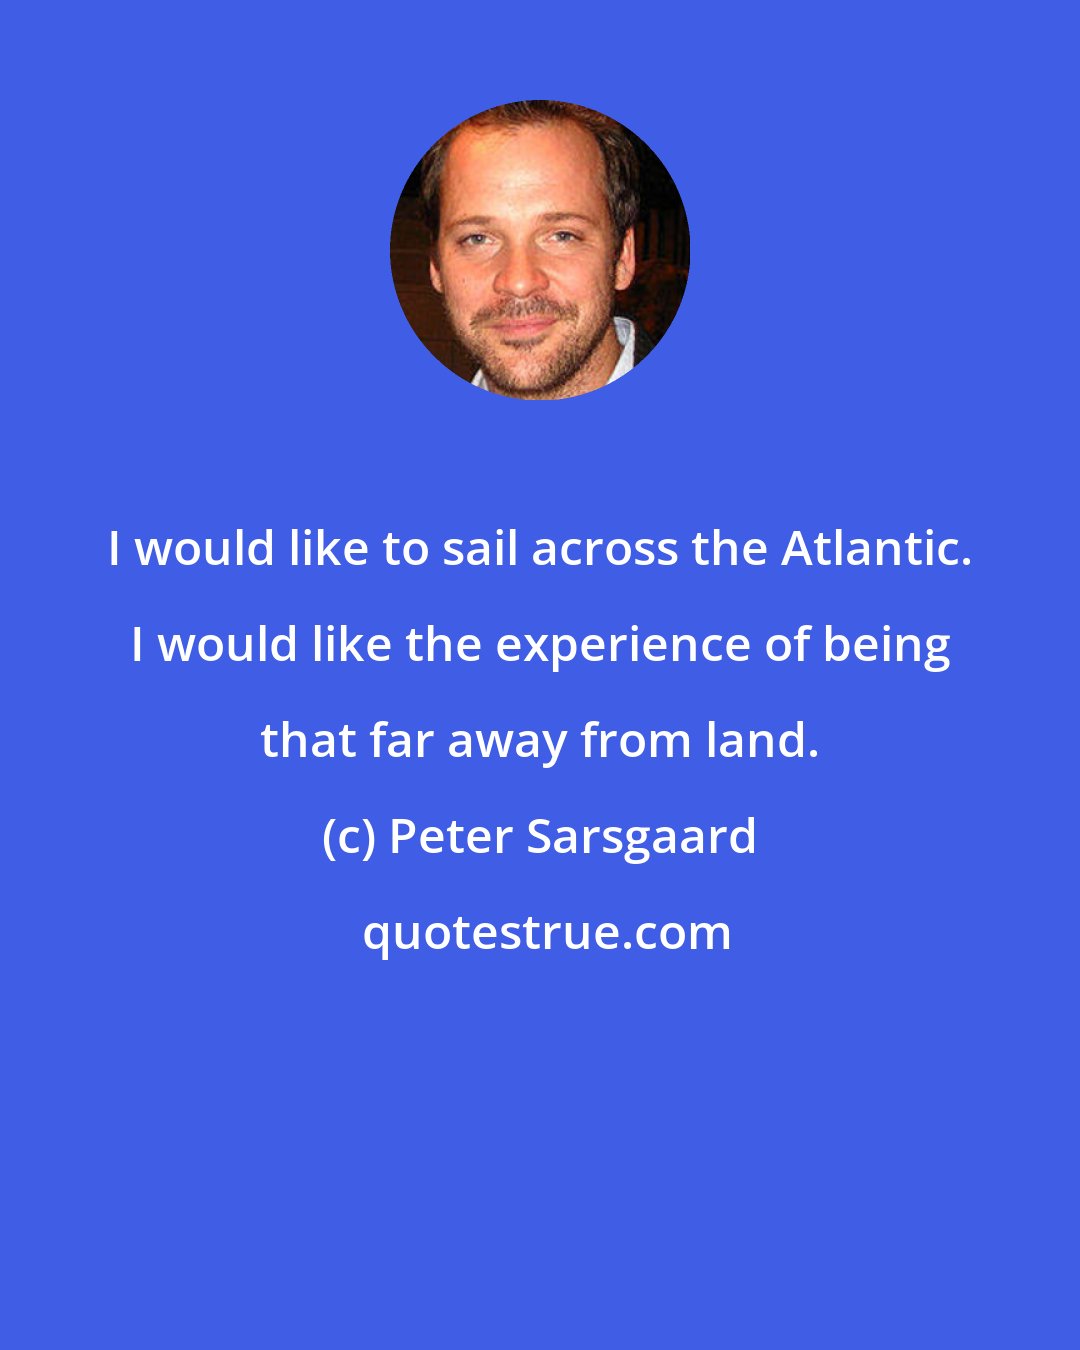 Peter Sarsgaard: I would like to sail across the Atlantic. I would like the experience of being that far away from land.